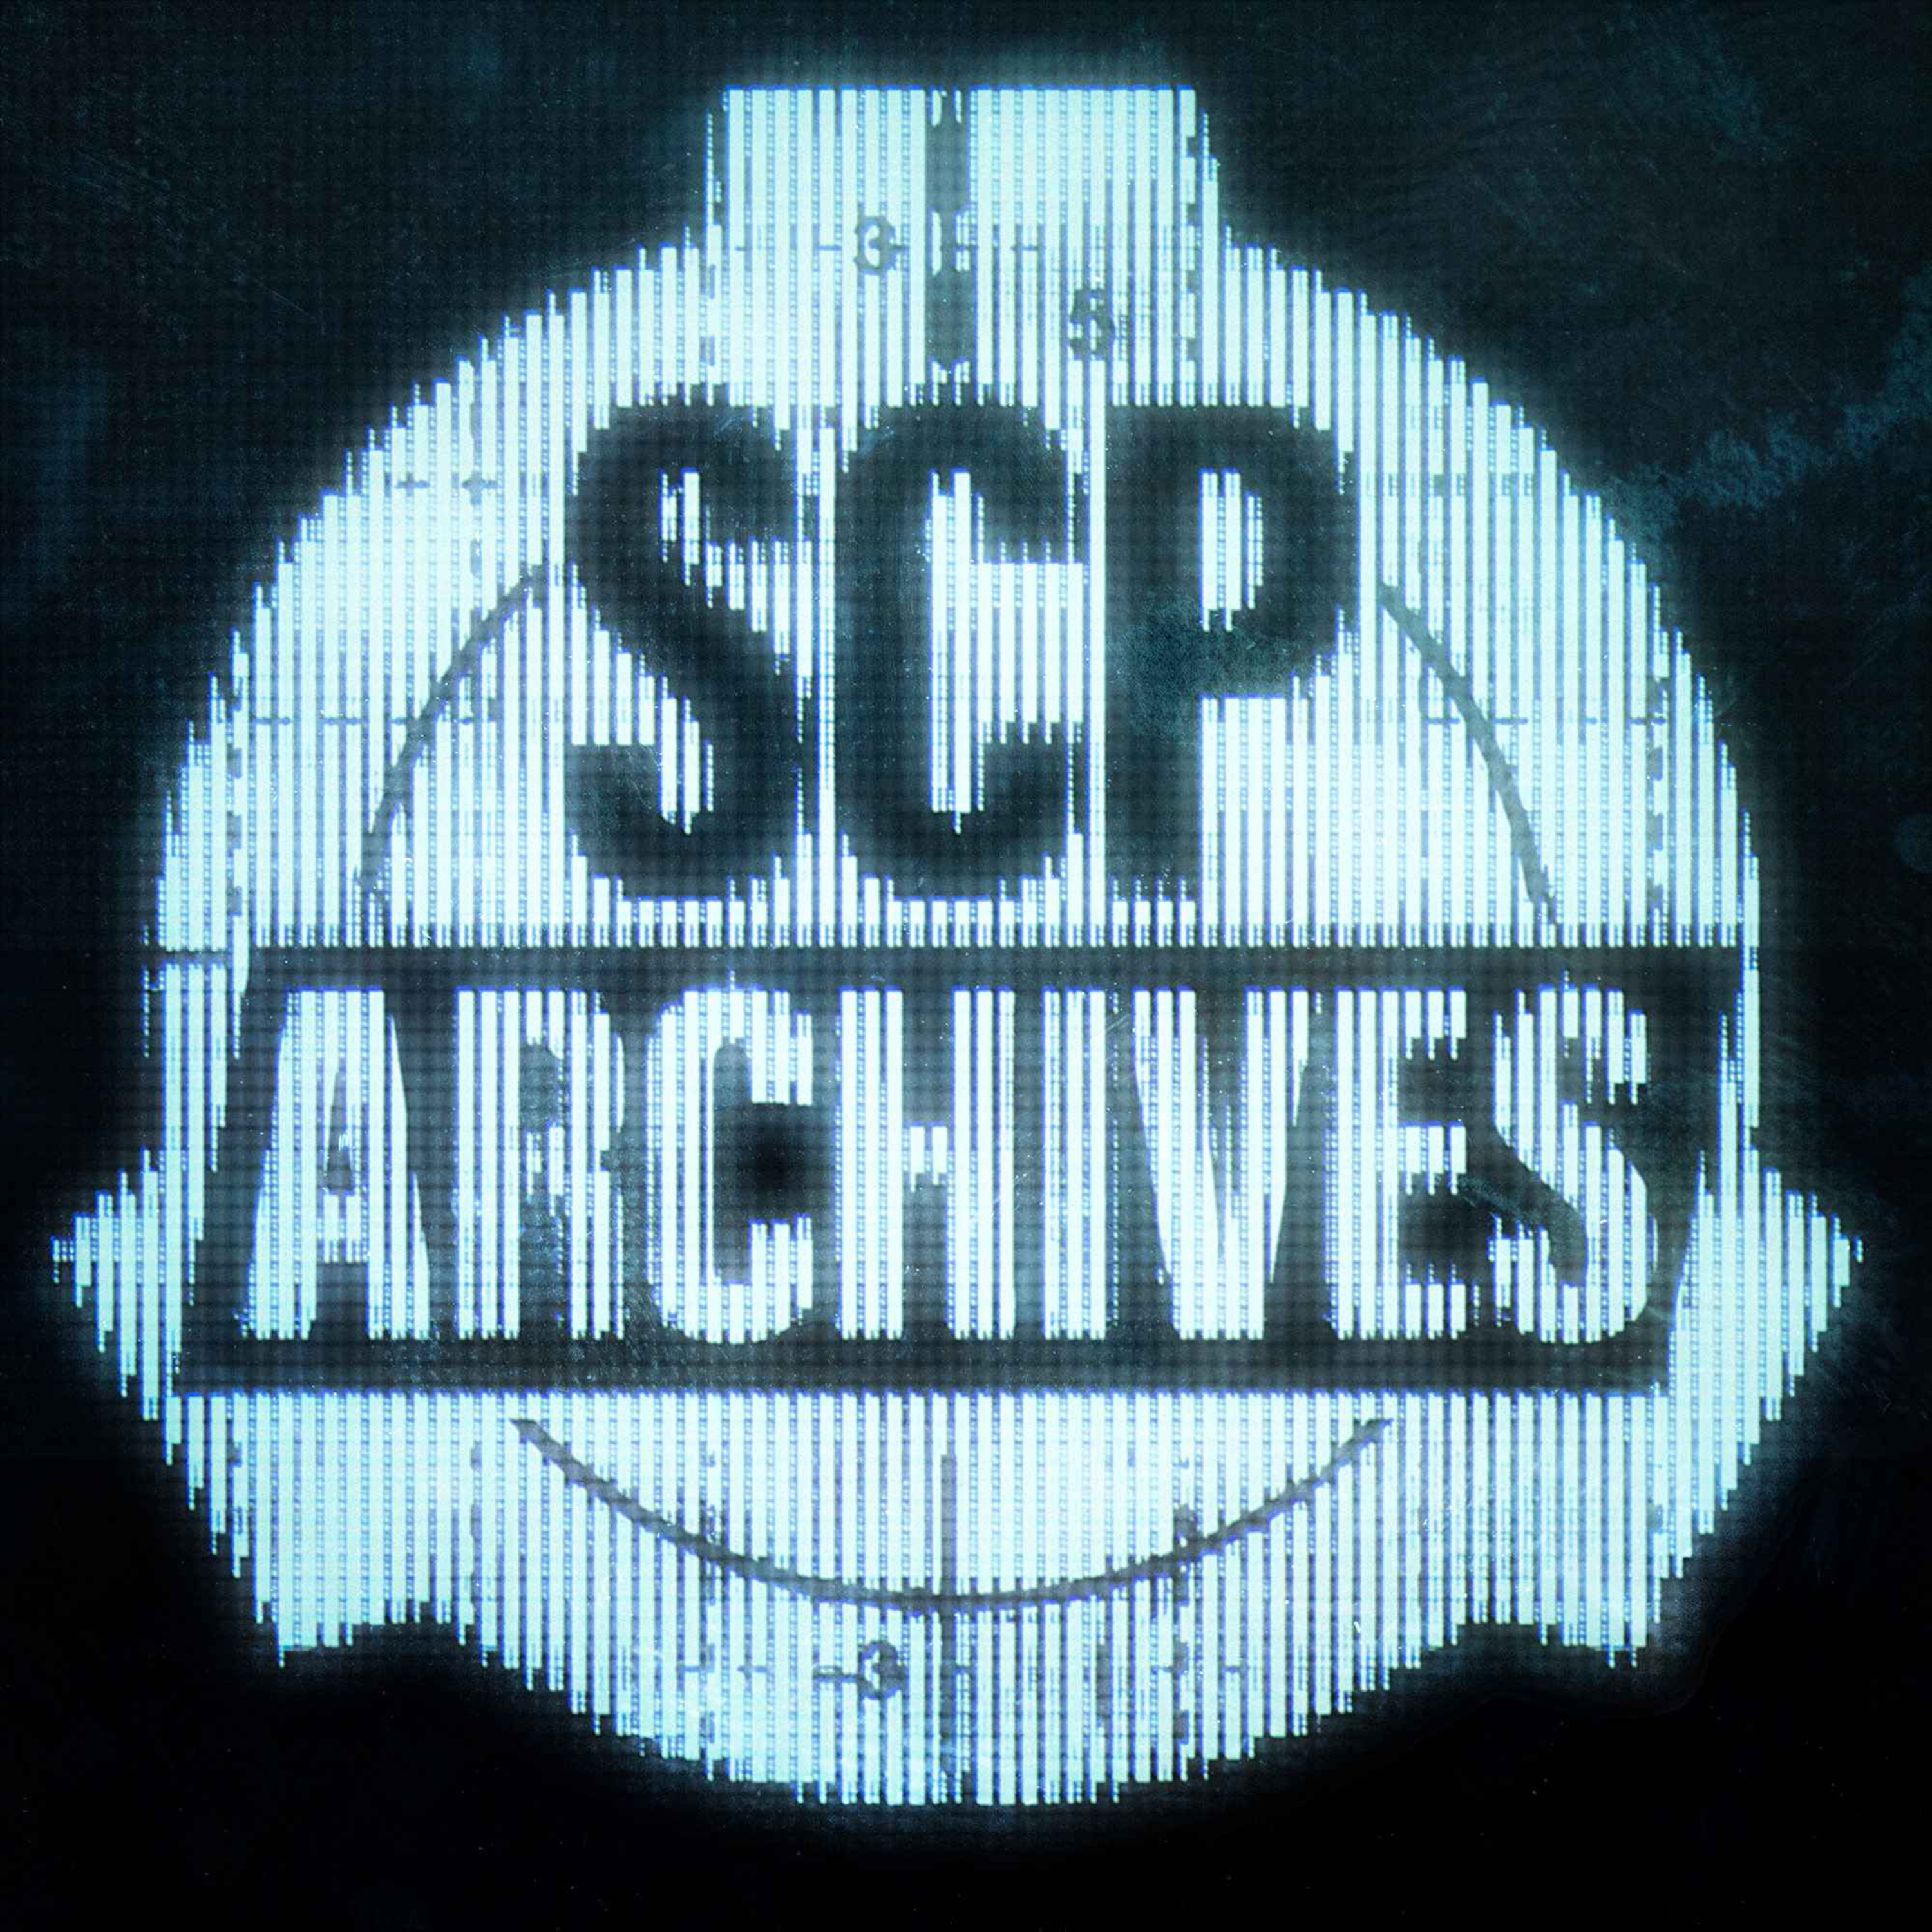 SCP Archives